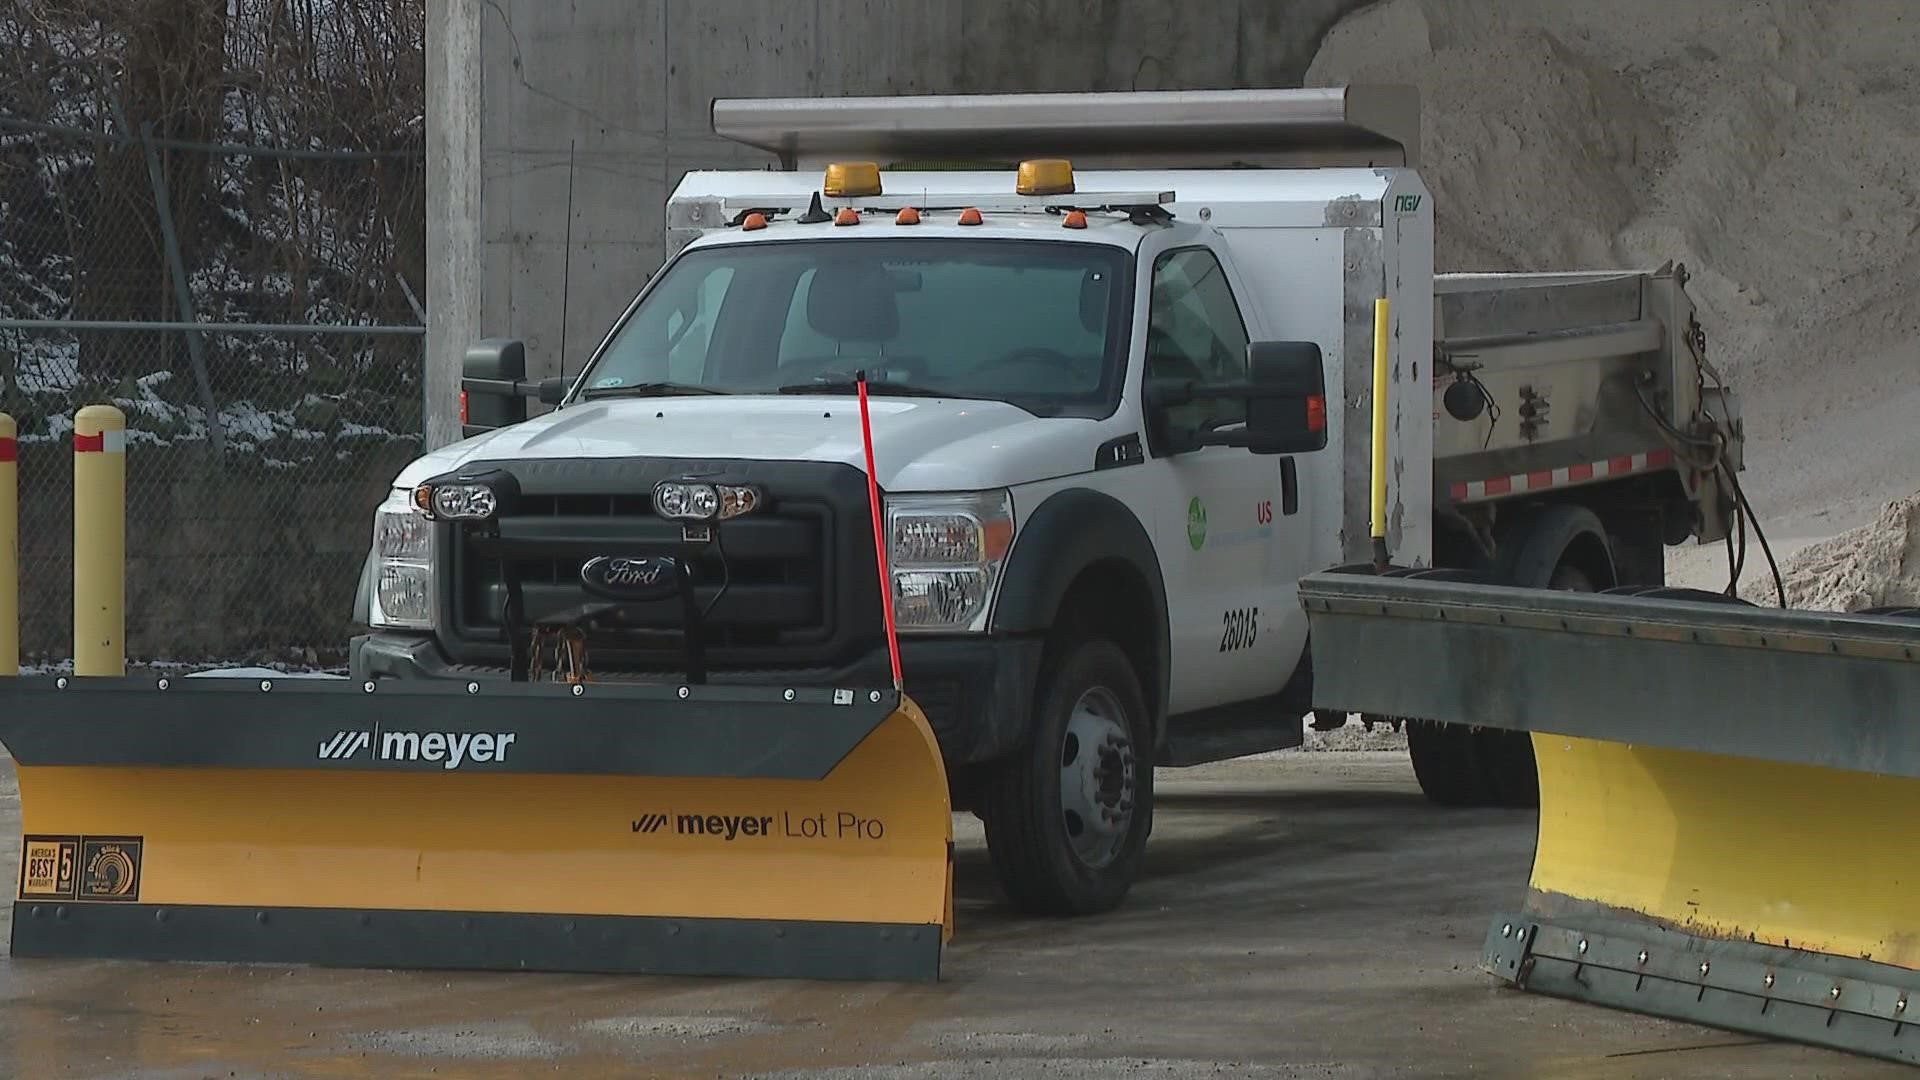 Columbus has told their employees they may be called to work as well. Adding to the challenge of plowing snow, ODOT says it’s still down about 15% of its drivers.